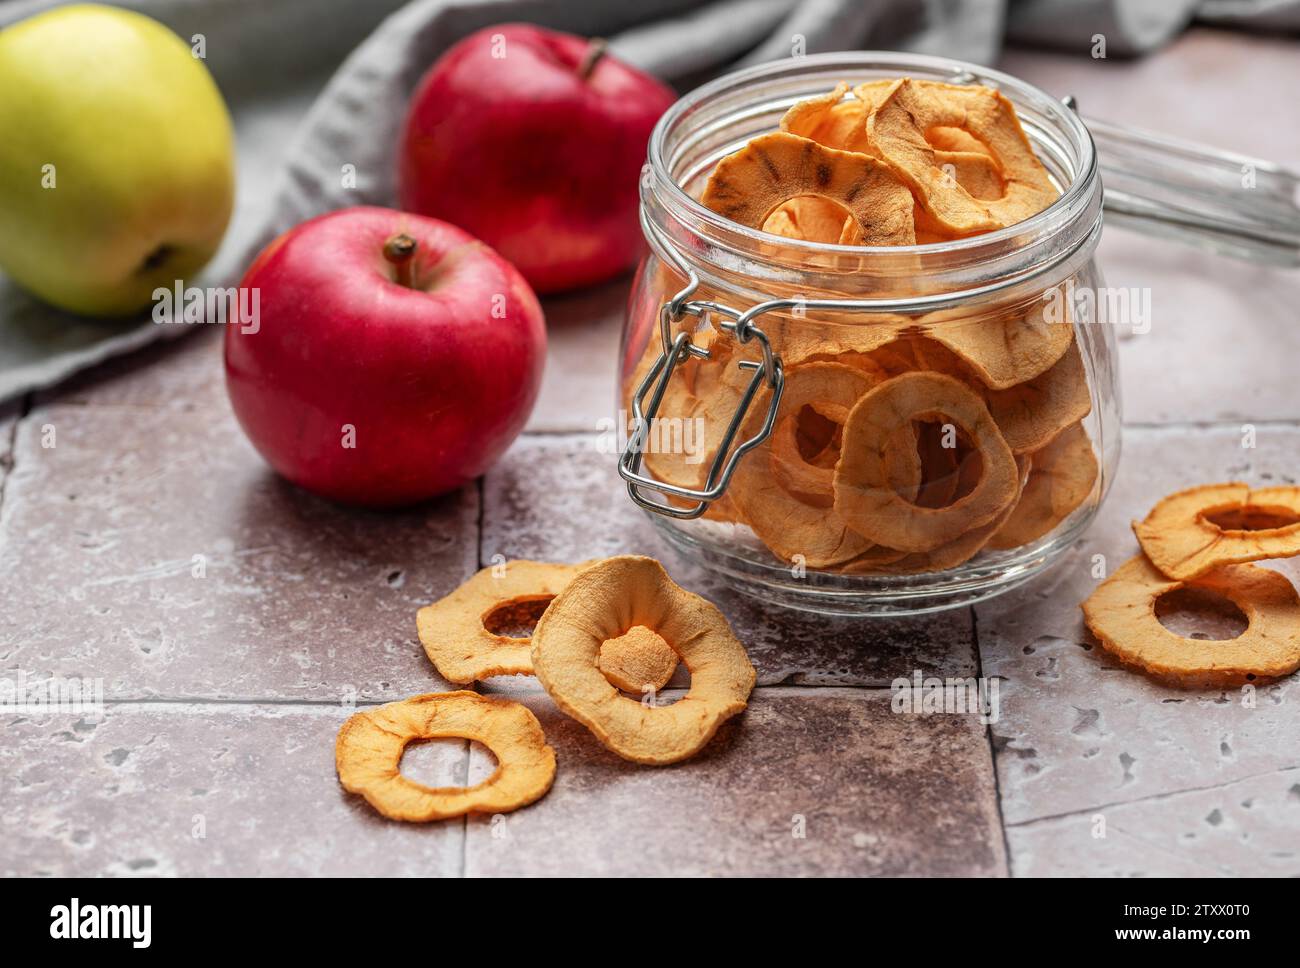 Dried apple chips. Dehydrated apples. Homemade dried organic apple sliced. Stock Photo